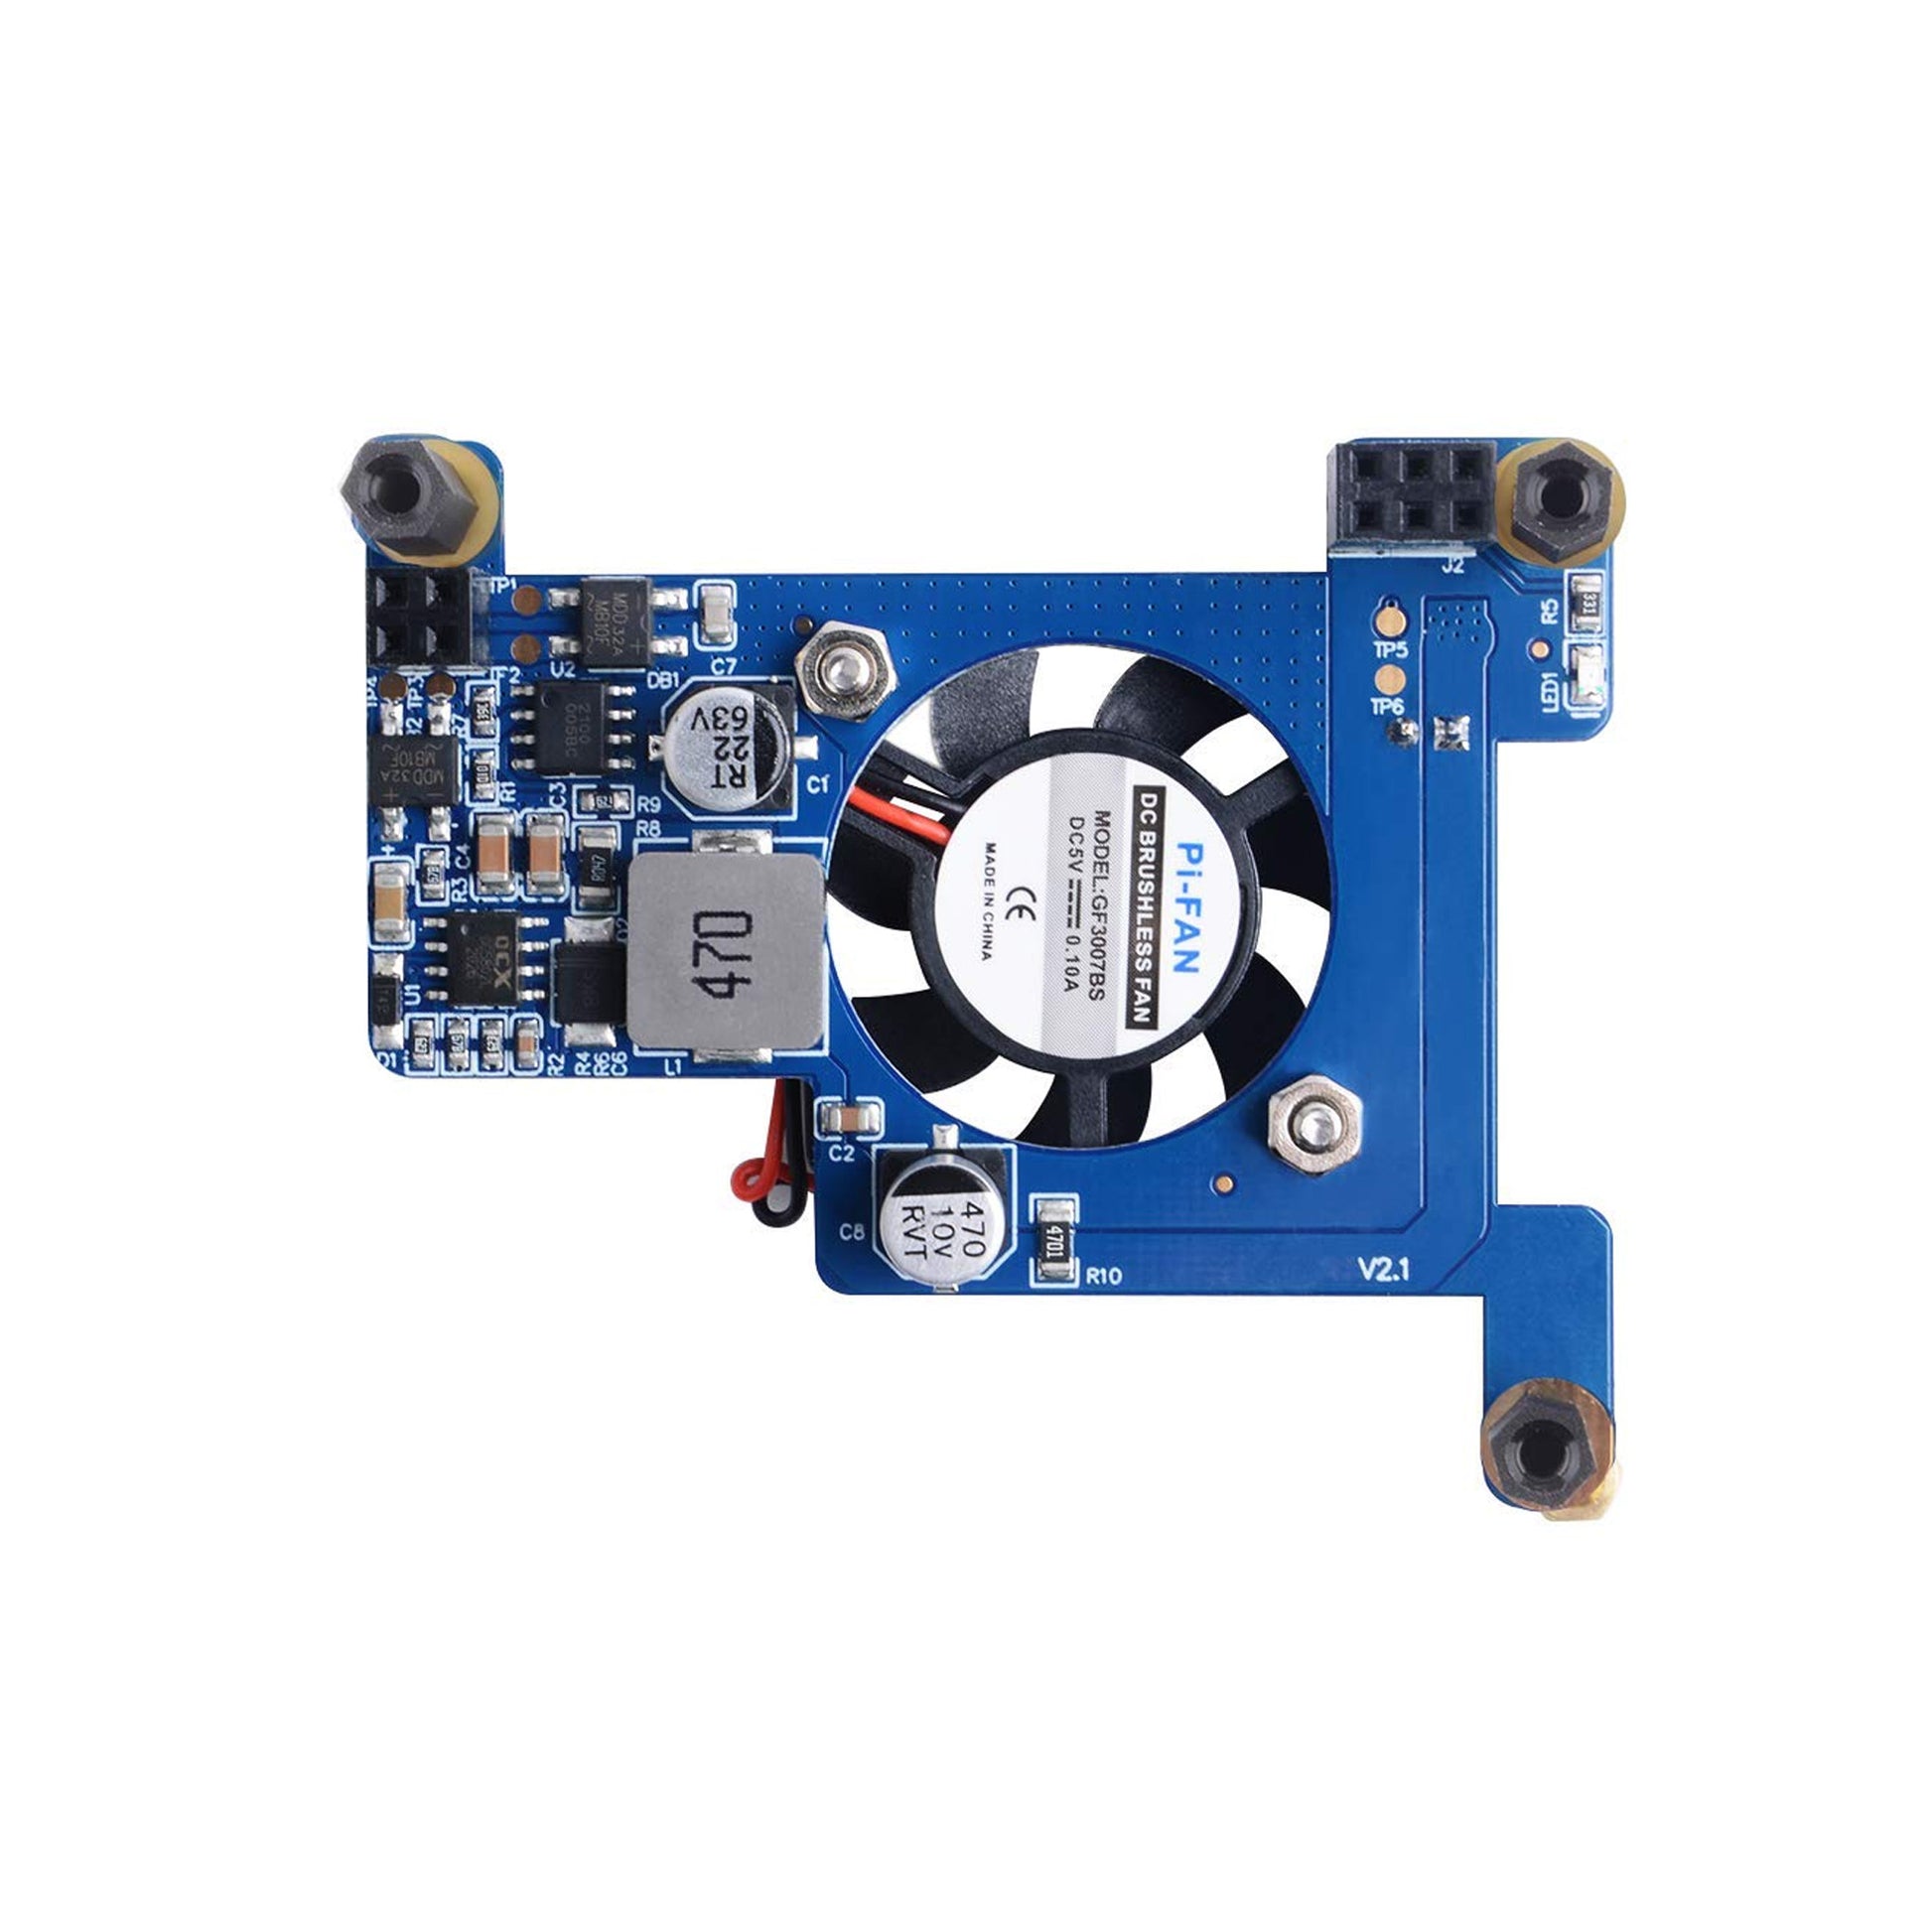 Raspberry Pi PoE HAT Support IEEE 802.3af or 802.3at PoE Standard, with Cooling Fan for Pi 4 Model B / 3B, B Plus- RS2850 - REES52